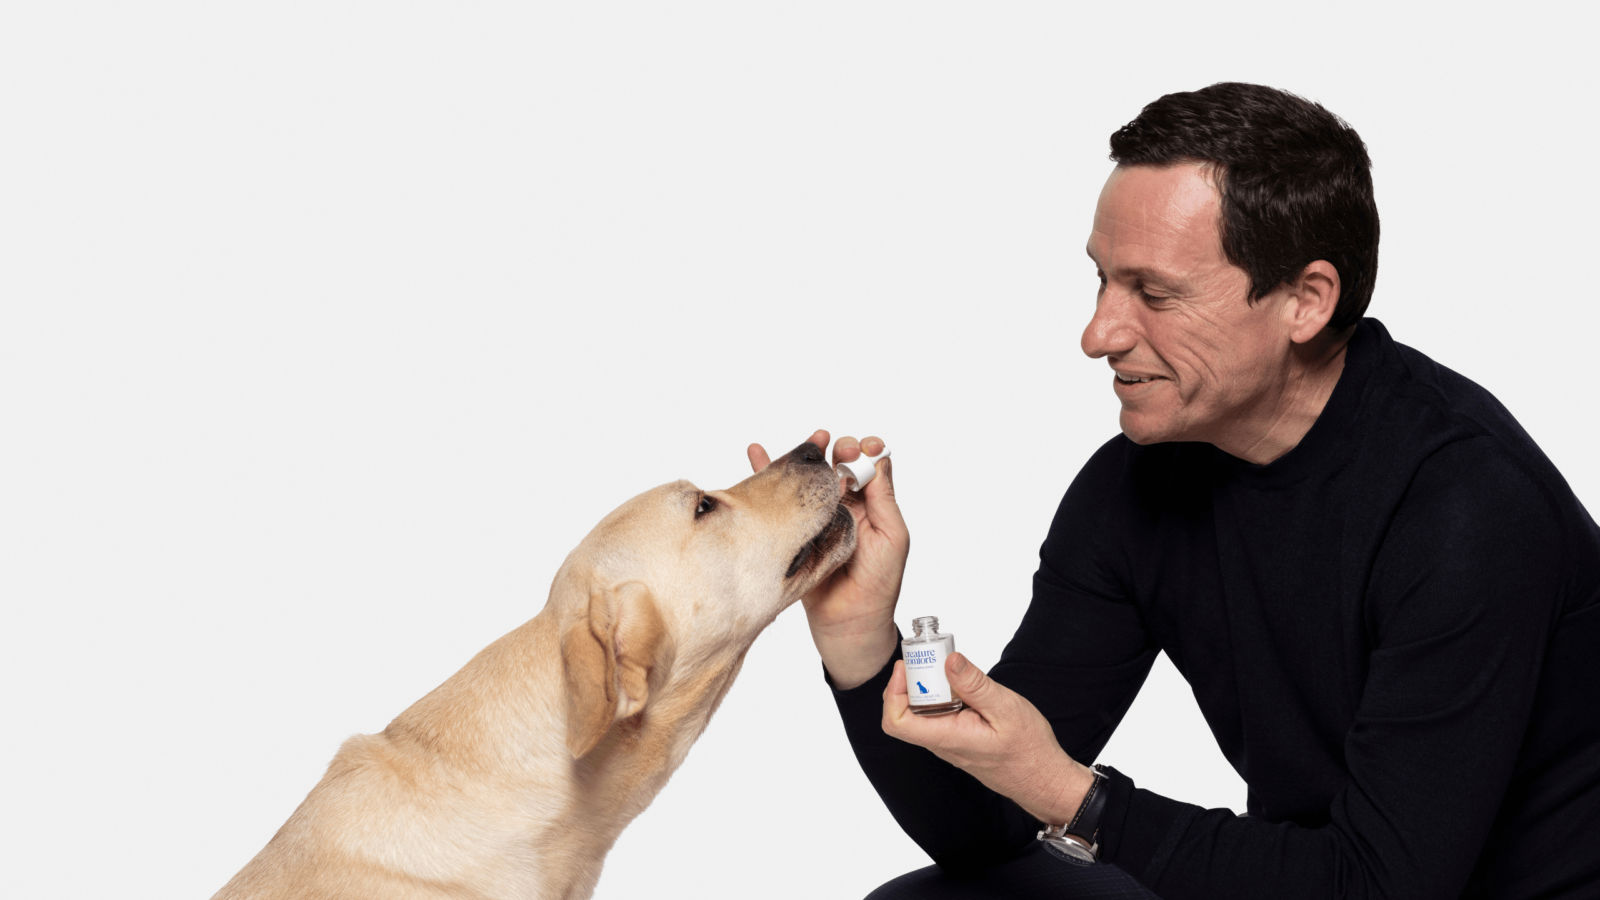 Everything you need to know about CBD for pets, according to veterinarian David Gething